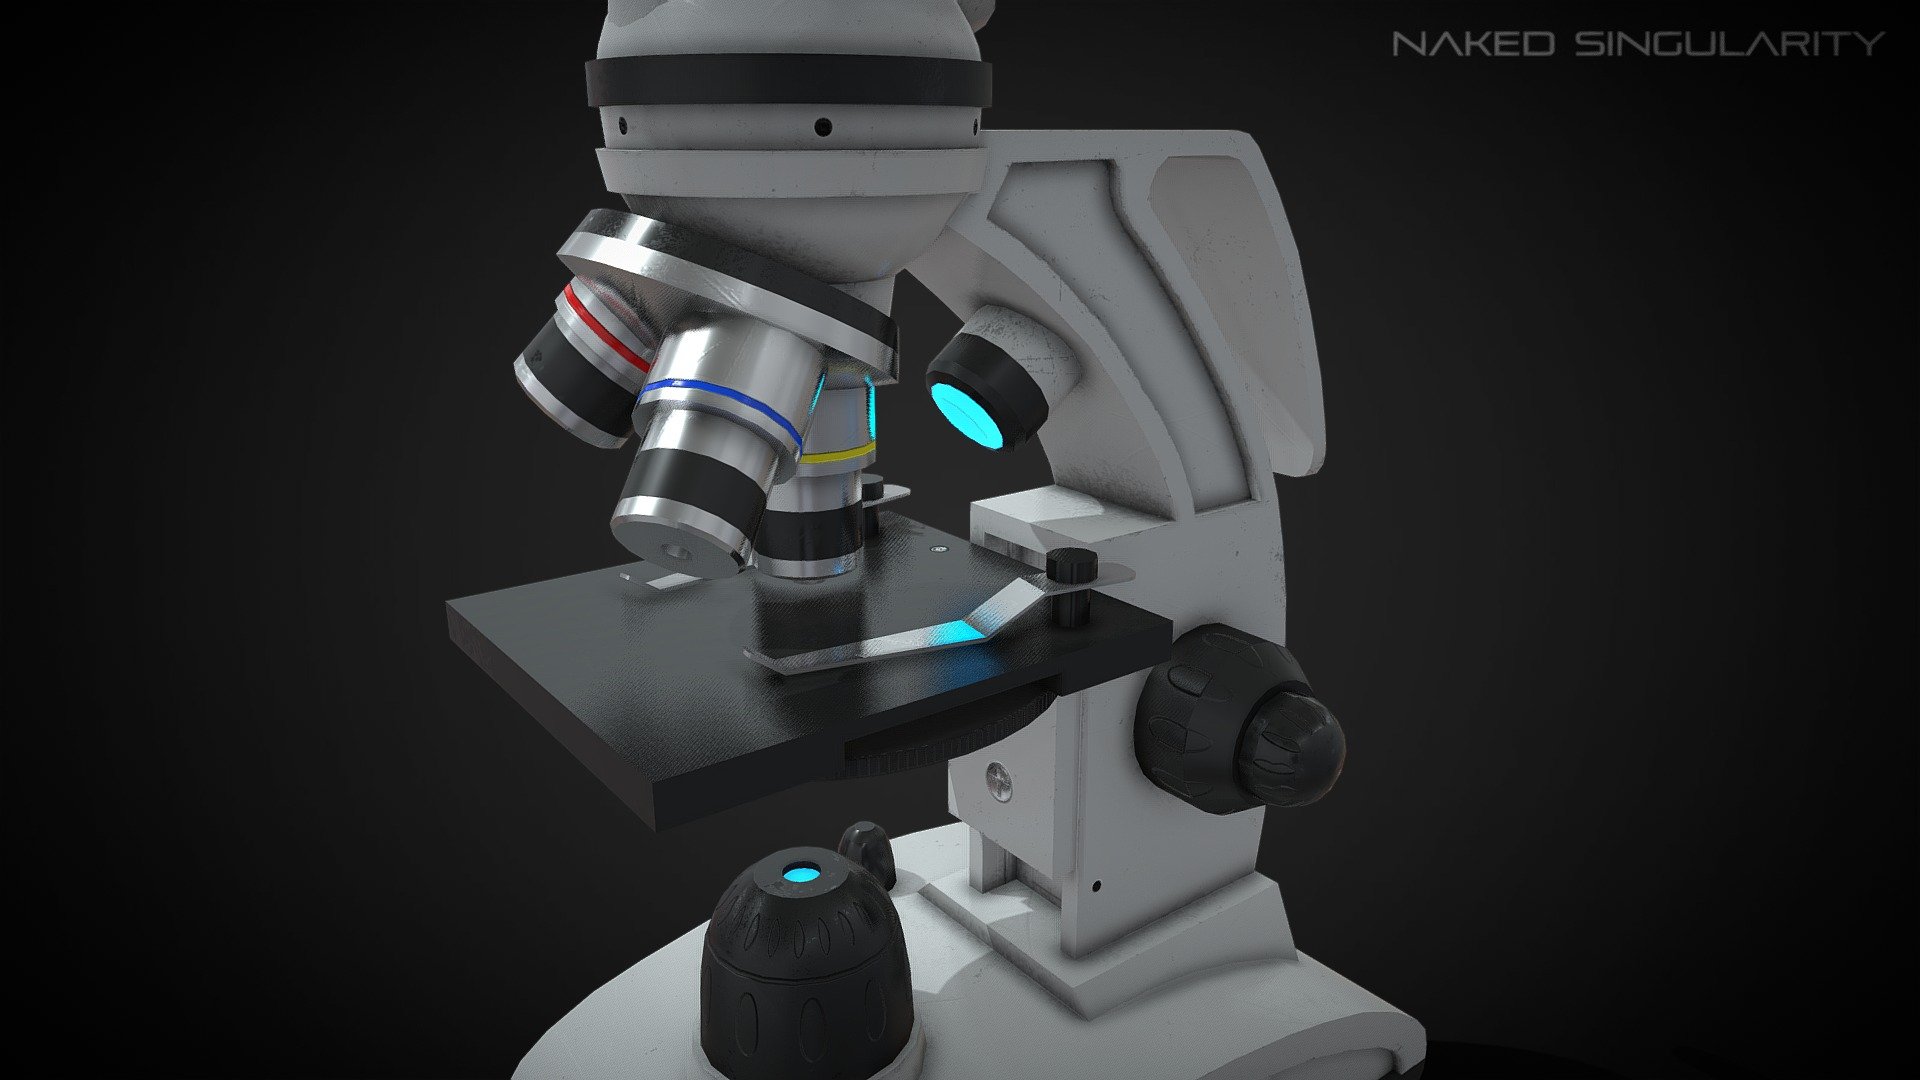 Invert Light Microscope | Low poly | PBR | Laboratory equipment facility


High quality low poly model.
Parts are seperated so you can create animation in your 3d software.
4K texture.
UV channel 2 unwrapped (for lightmap in Unity, Unreal Engine).
Real world scale.
PBR texturing.
Rigged.

Note: The animations are included but for previewing mainly.

Check out other Laboratory equipment here

Customer support: nakedsingularity.studio@gmail.com

Follow us on: Youtube | Facebook | Instagram | Twitter | Artstation - Invert Light Microscope | Low poly | PBR - Buy Royalty Free 3D model by Naked Singularity (@nakedsingularity) 3d model